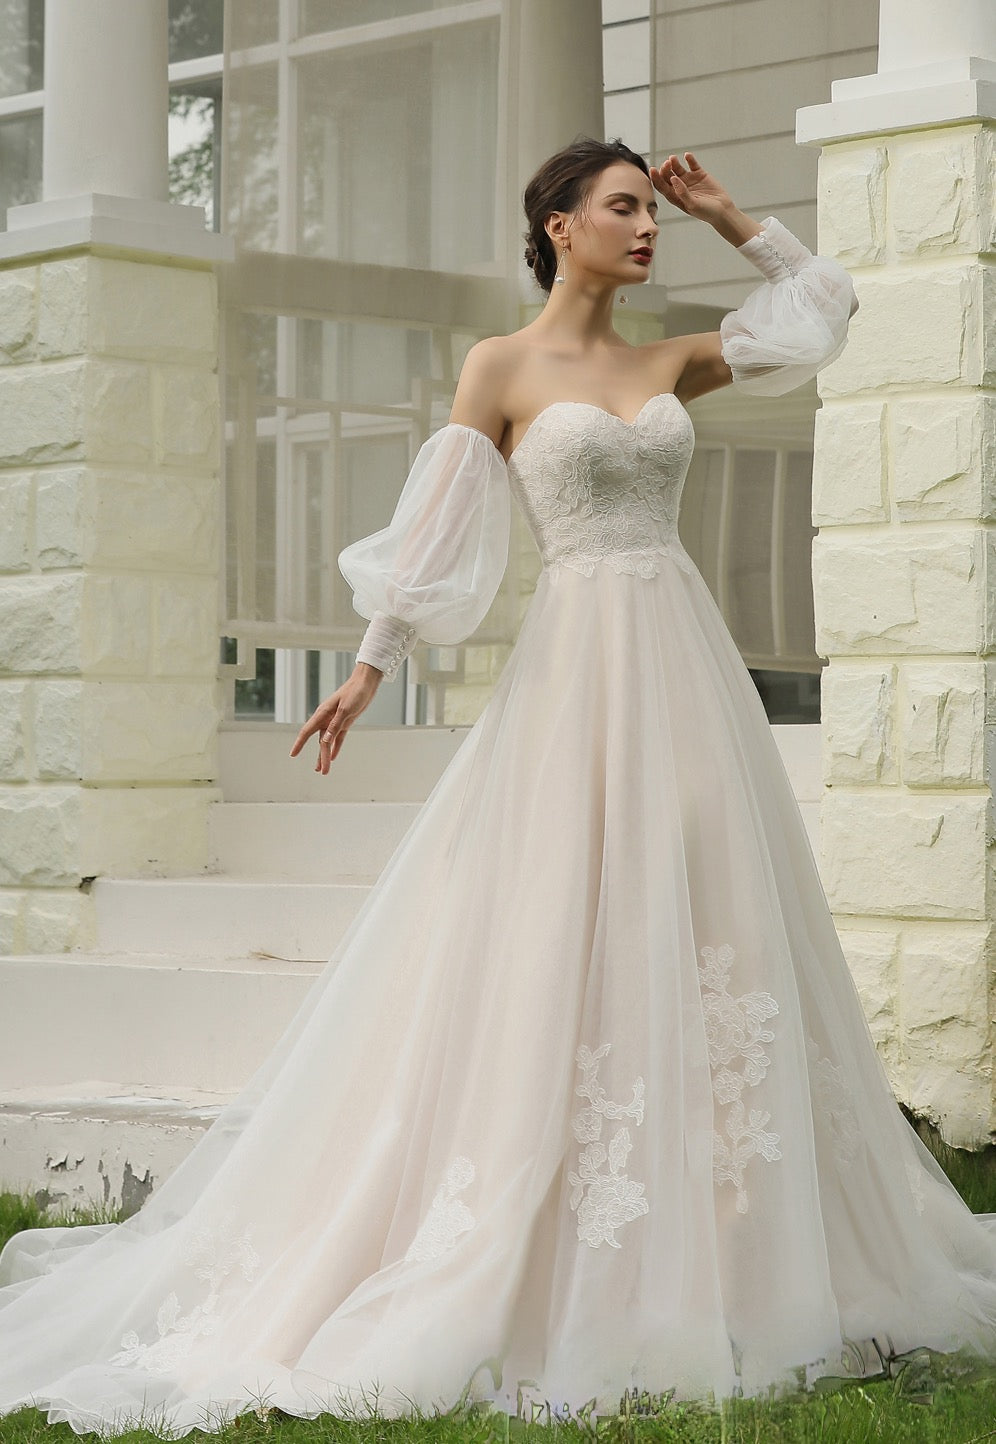 Classic A-Line Strapless Bridal Gown With Detachable Bishop Sleeves